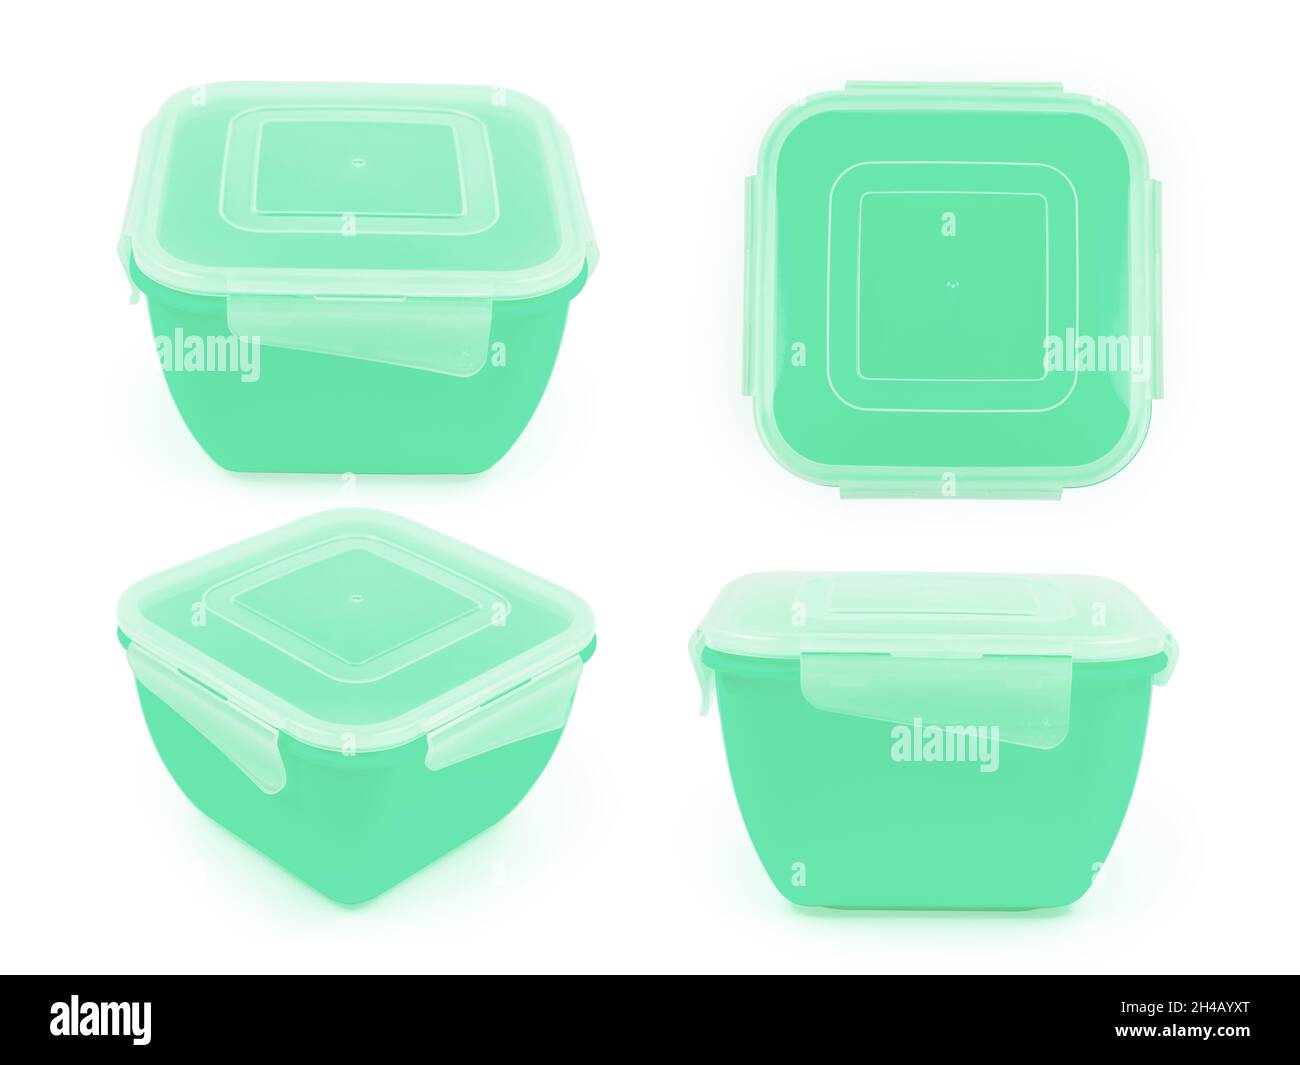 https://c8.alamy.com/comp/2H4AYXT/mint-square-plastic-lunch-box-in-top-and-side-view-isolated-on-white-background-2H4AYXT.jpg